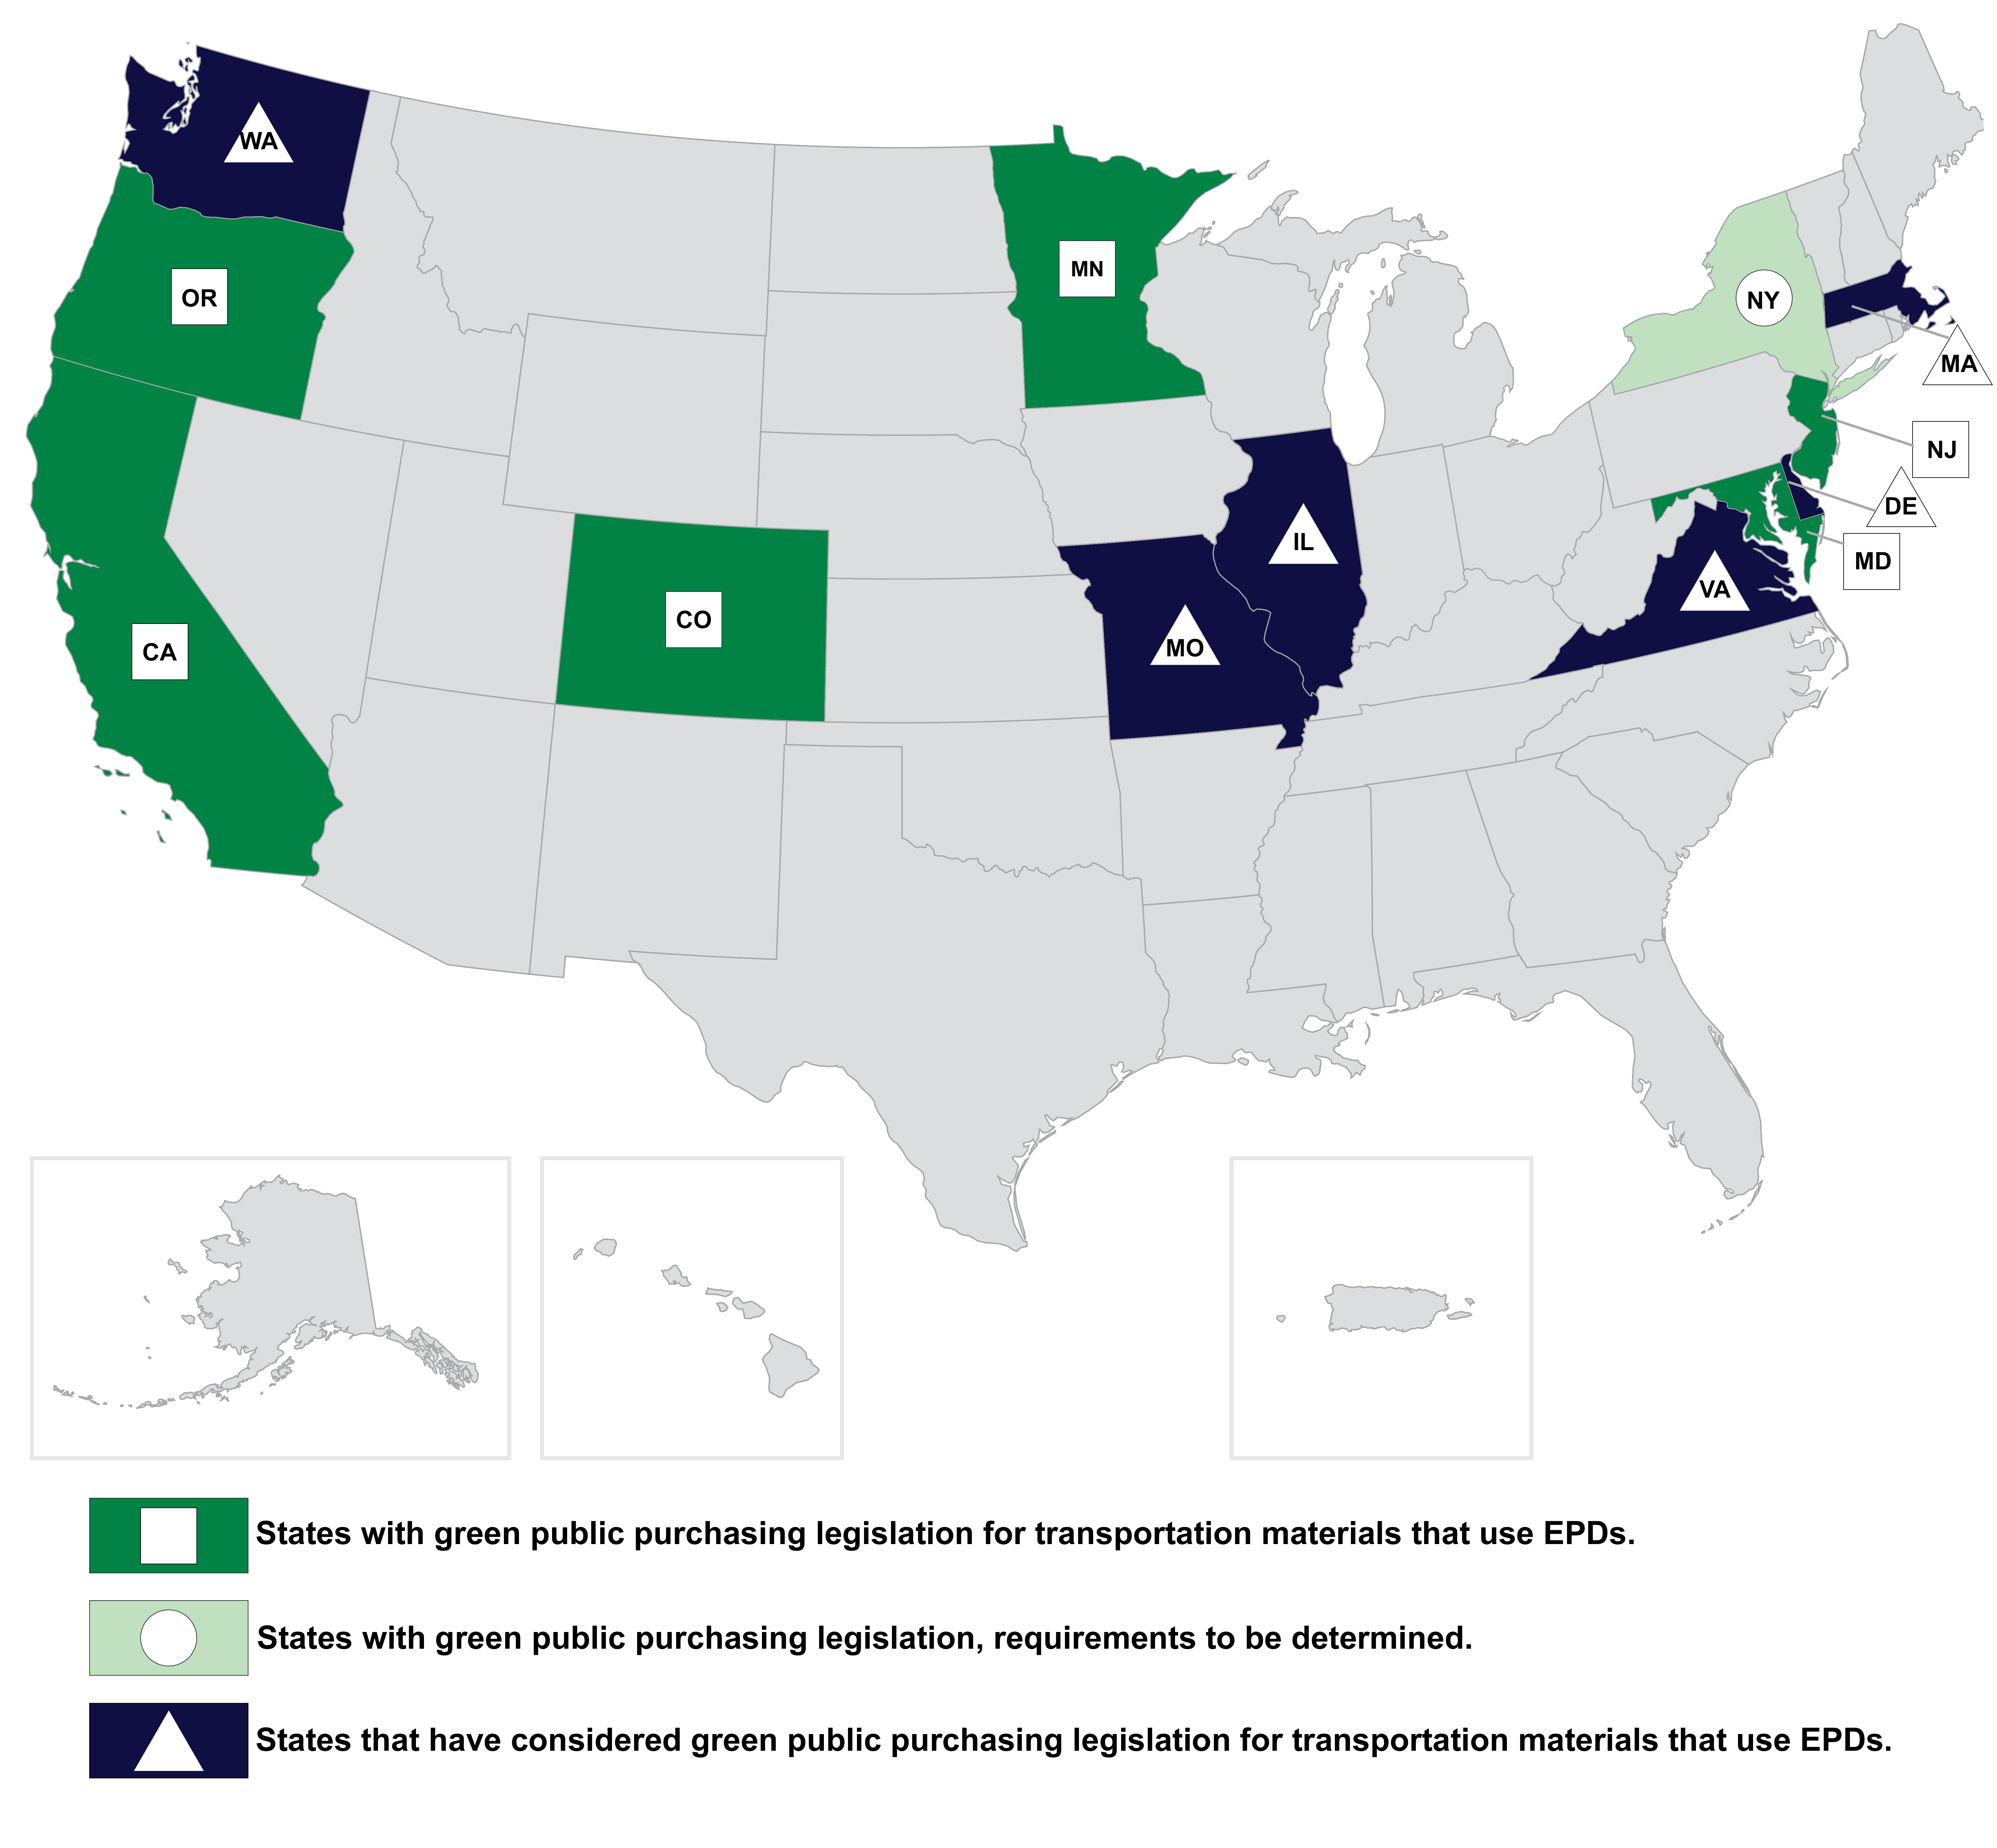 States with green public purchasing legislation for transportation materials that use EPDs: California, Colorado, Maryland, Minnesota, New Jersey, and Oregon. States with green public purchasing legislation, requirements to be determined: New York. States that have considered green public purchasing legislation for transportation materials that use EPDs: Delaware, Illinois, Massachusetts, Missouri, Virginia, and Washington.
